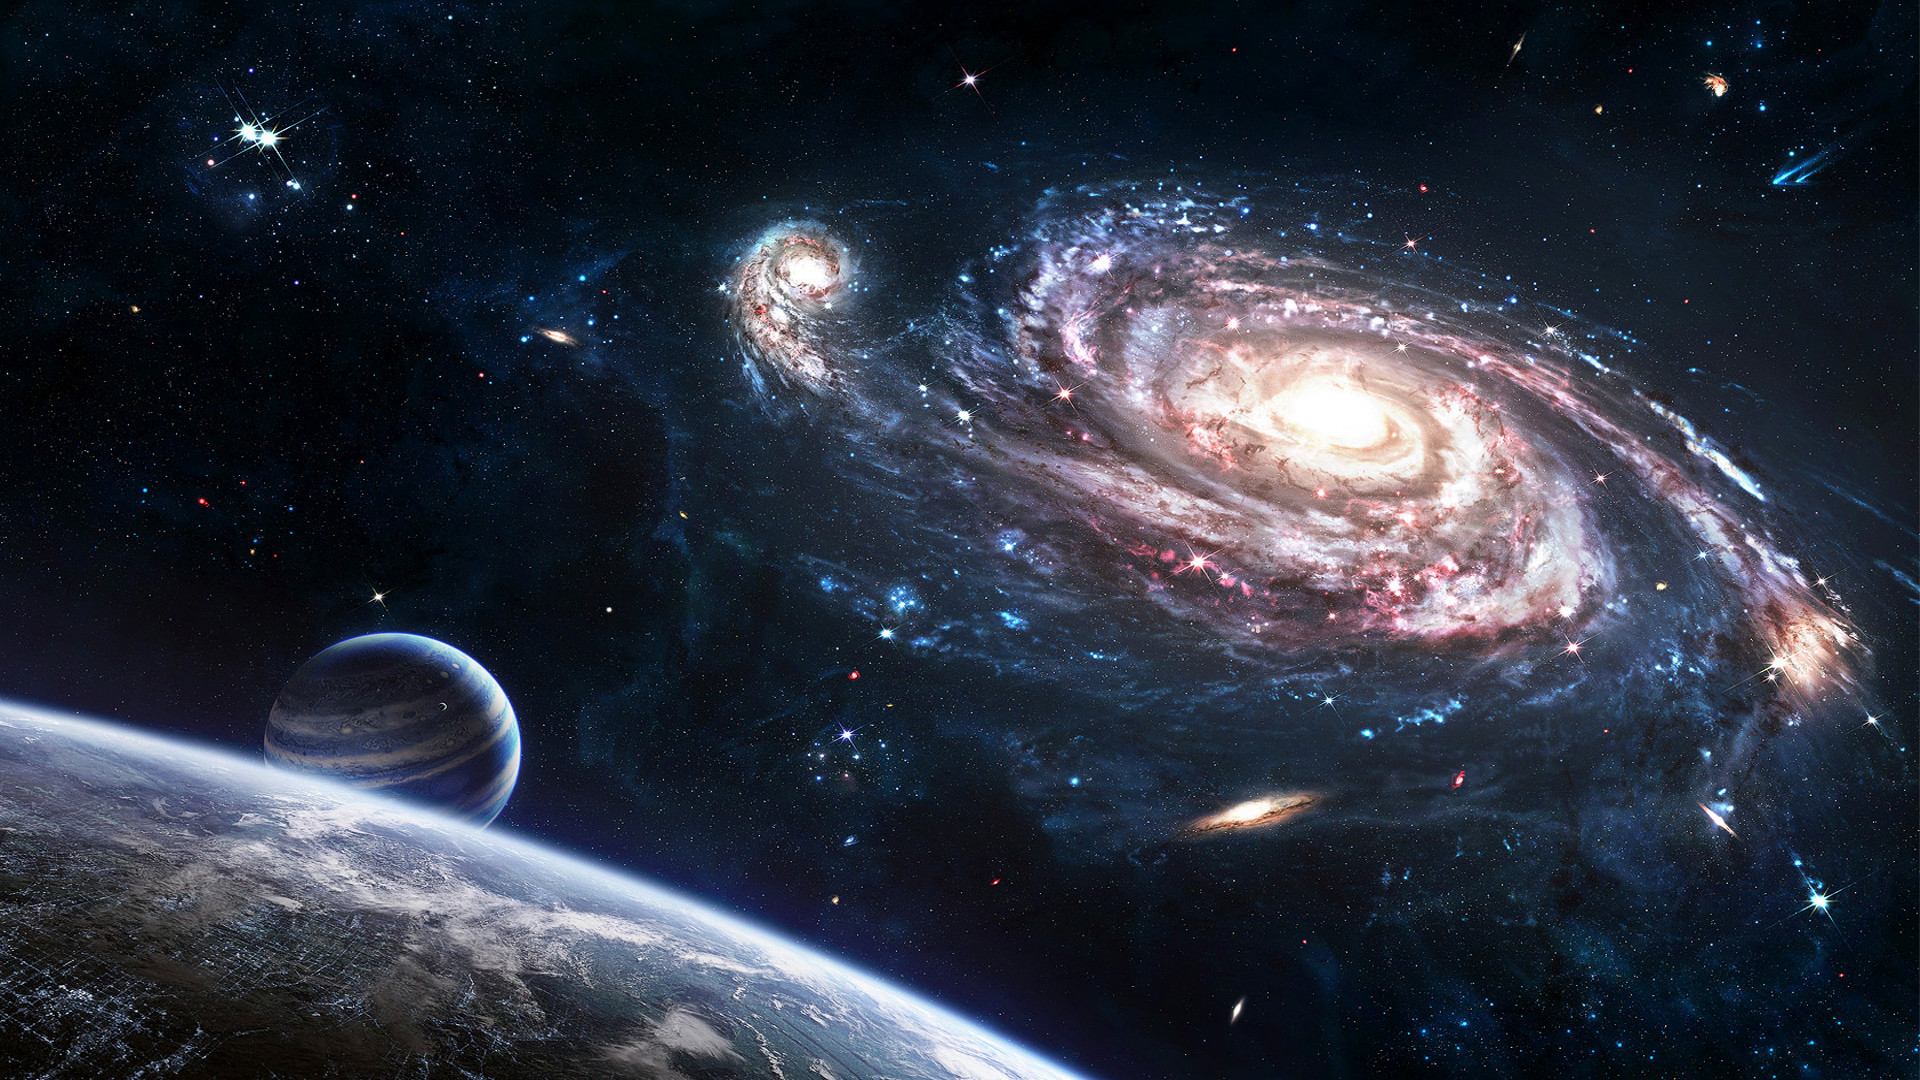 1920x1080 free Outer Space wallpaper, resolution : 1600 x tags: Outer, Space,  Galaxies.